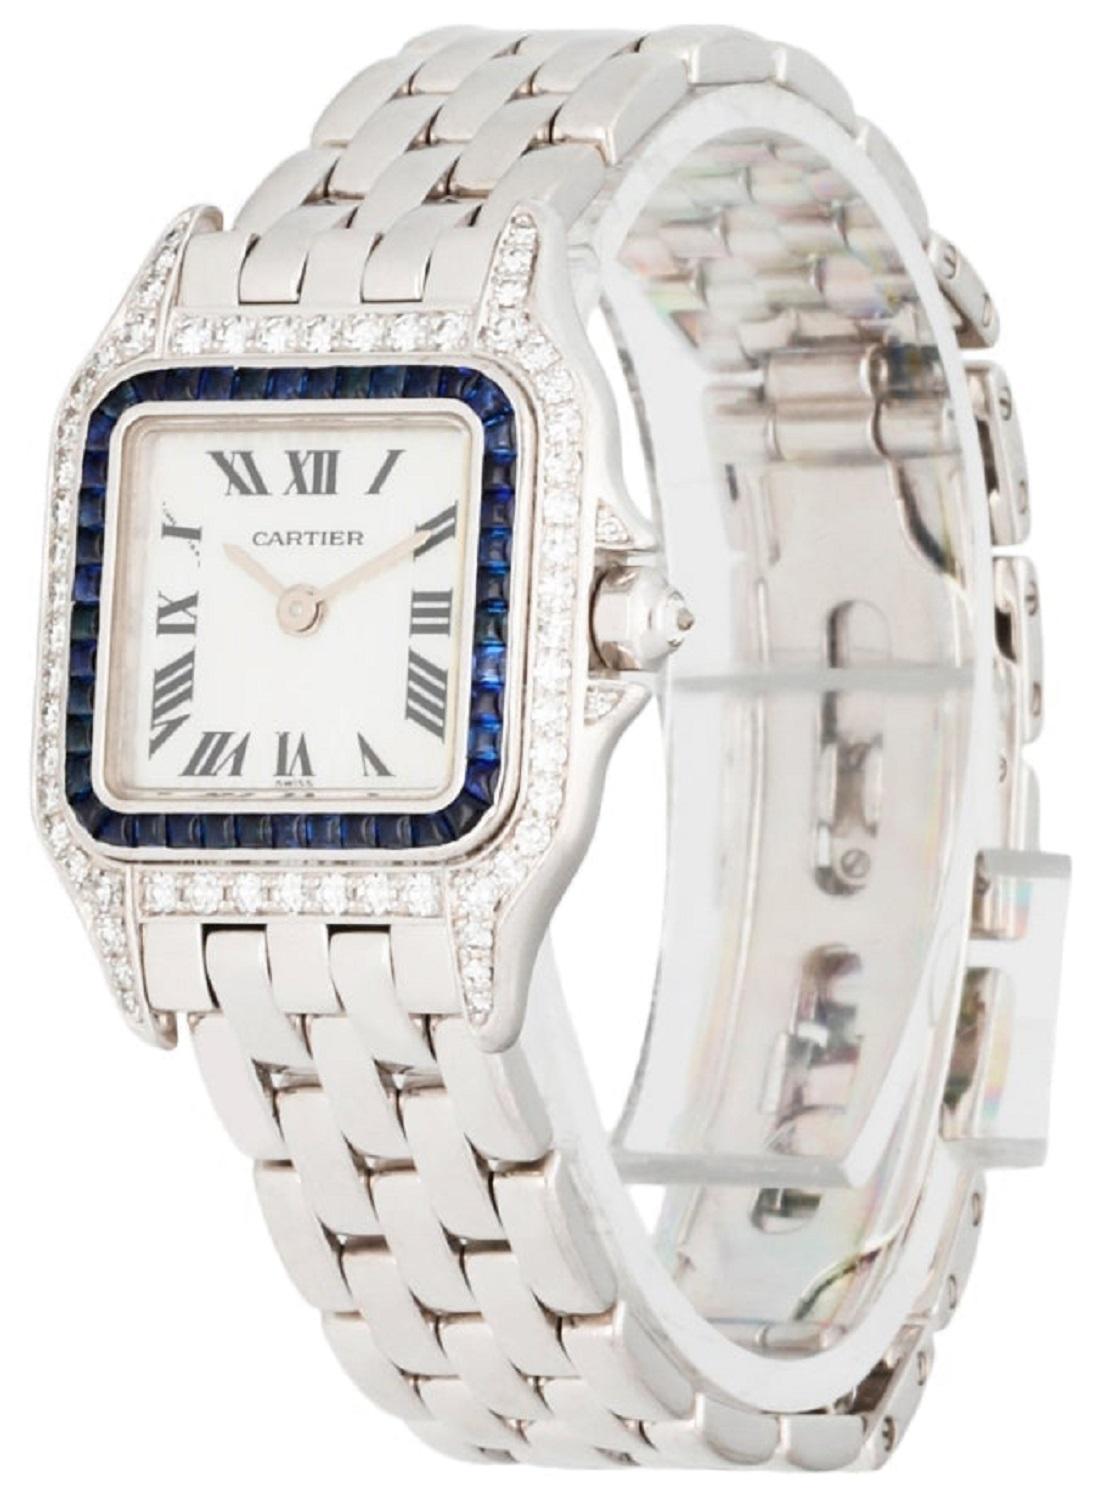 
Cartier Panthere 2362 Ladies Watch. 22mm 18k white gold case with factory diamond set. 18K white gold with factory blue sapphire bezel. Octagonal crown set with the diamond. Textured mother of pearl dial with white gold hands and Roman numeral hour